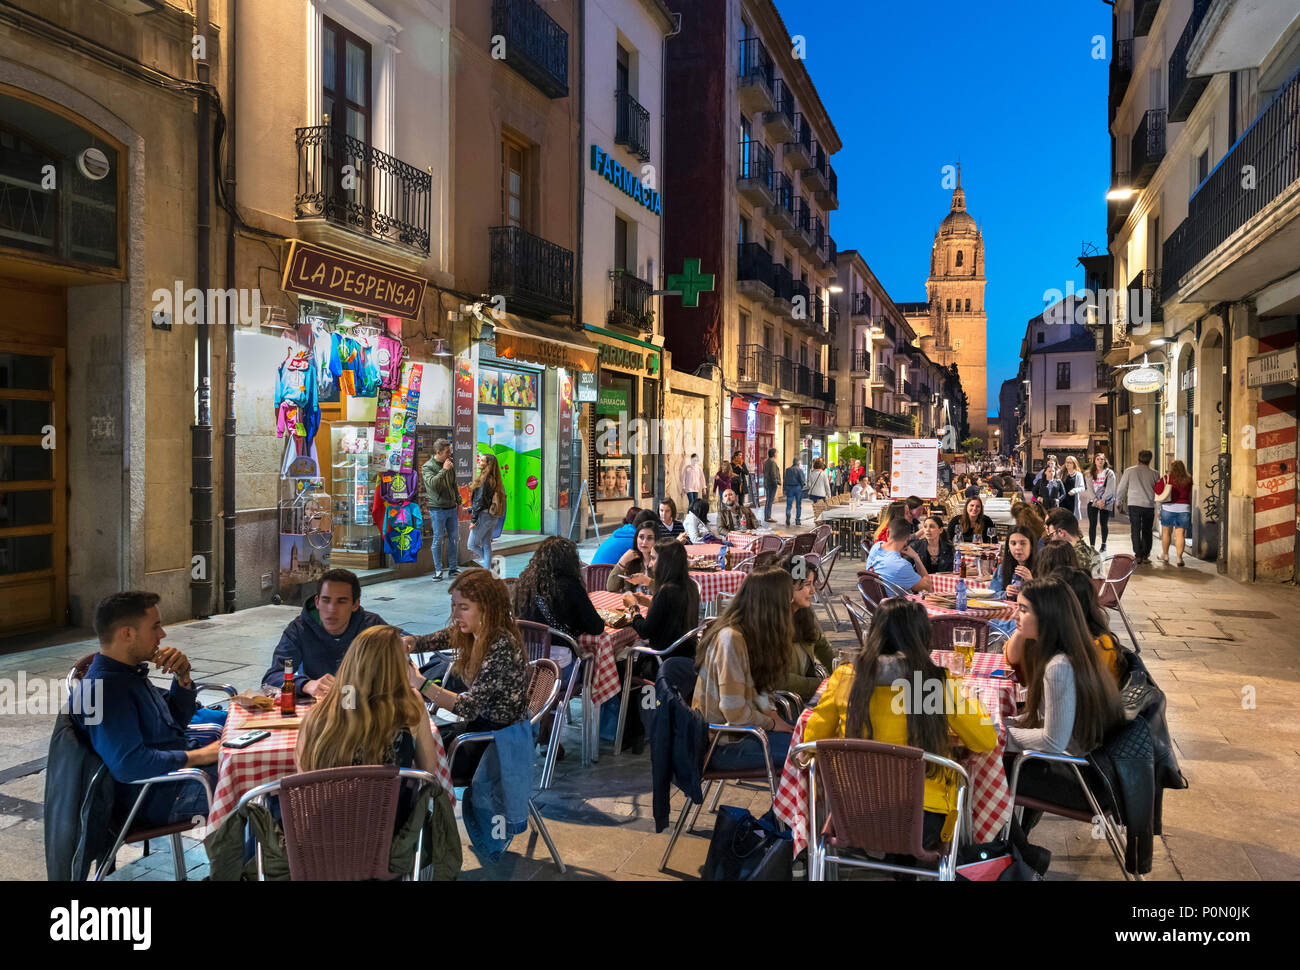 Salamanca, Spain. Cafes and restaurants at night on Calle Rua Mayor looking towards the tower of the Old Cathedral, Salamanca, Castilla y Leon, Spai Stock Photo